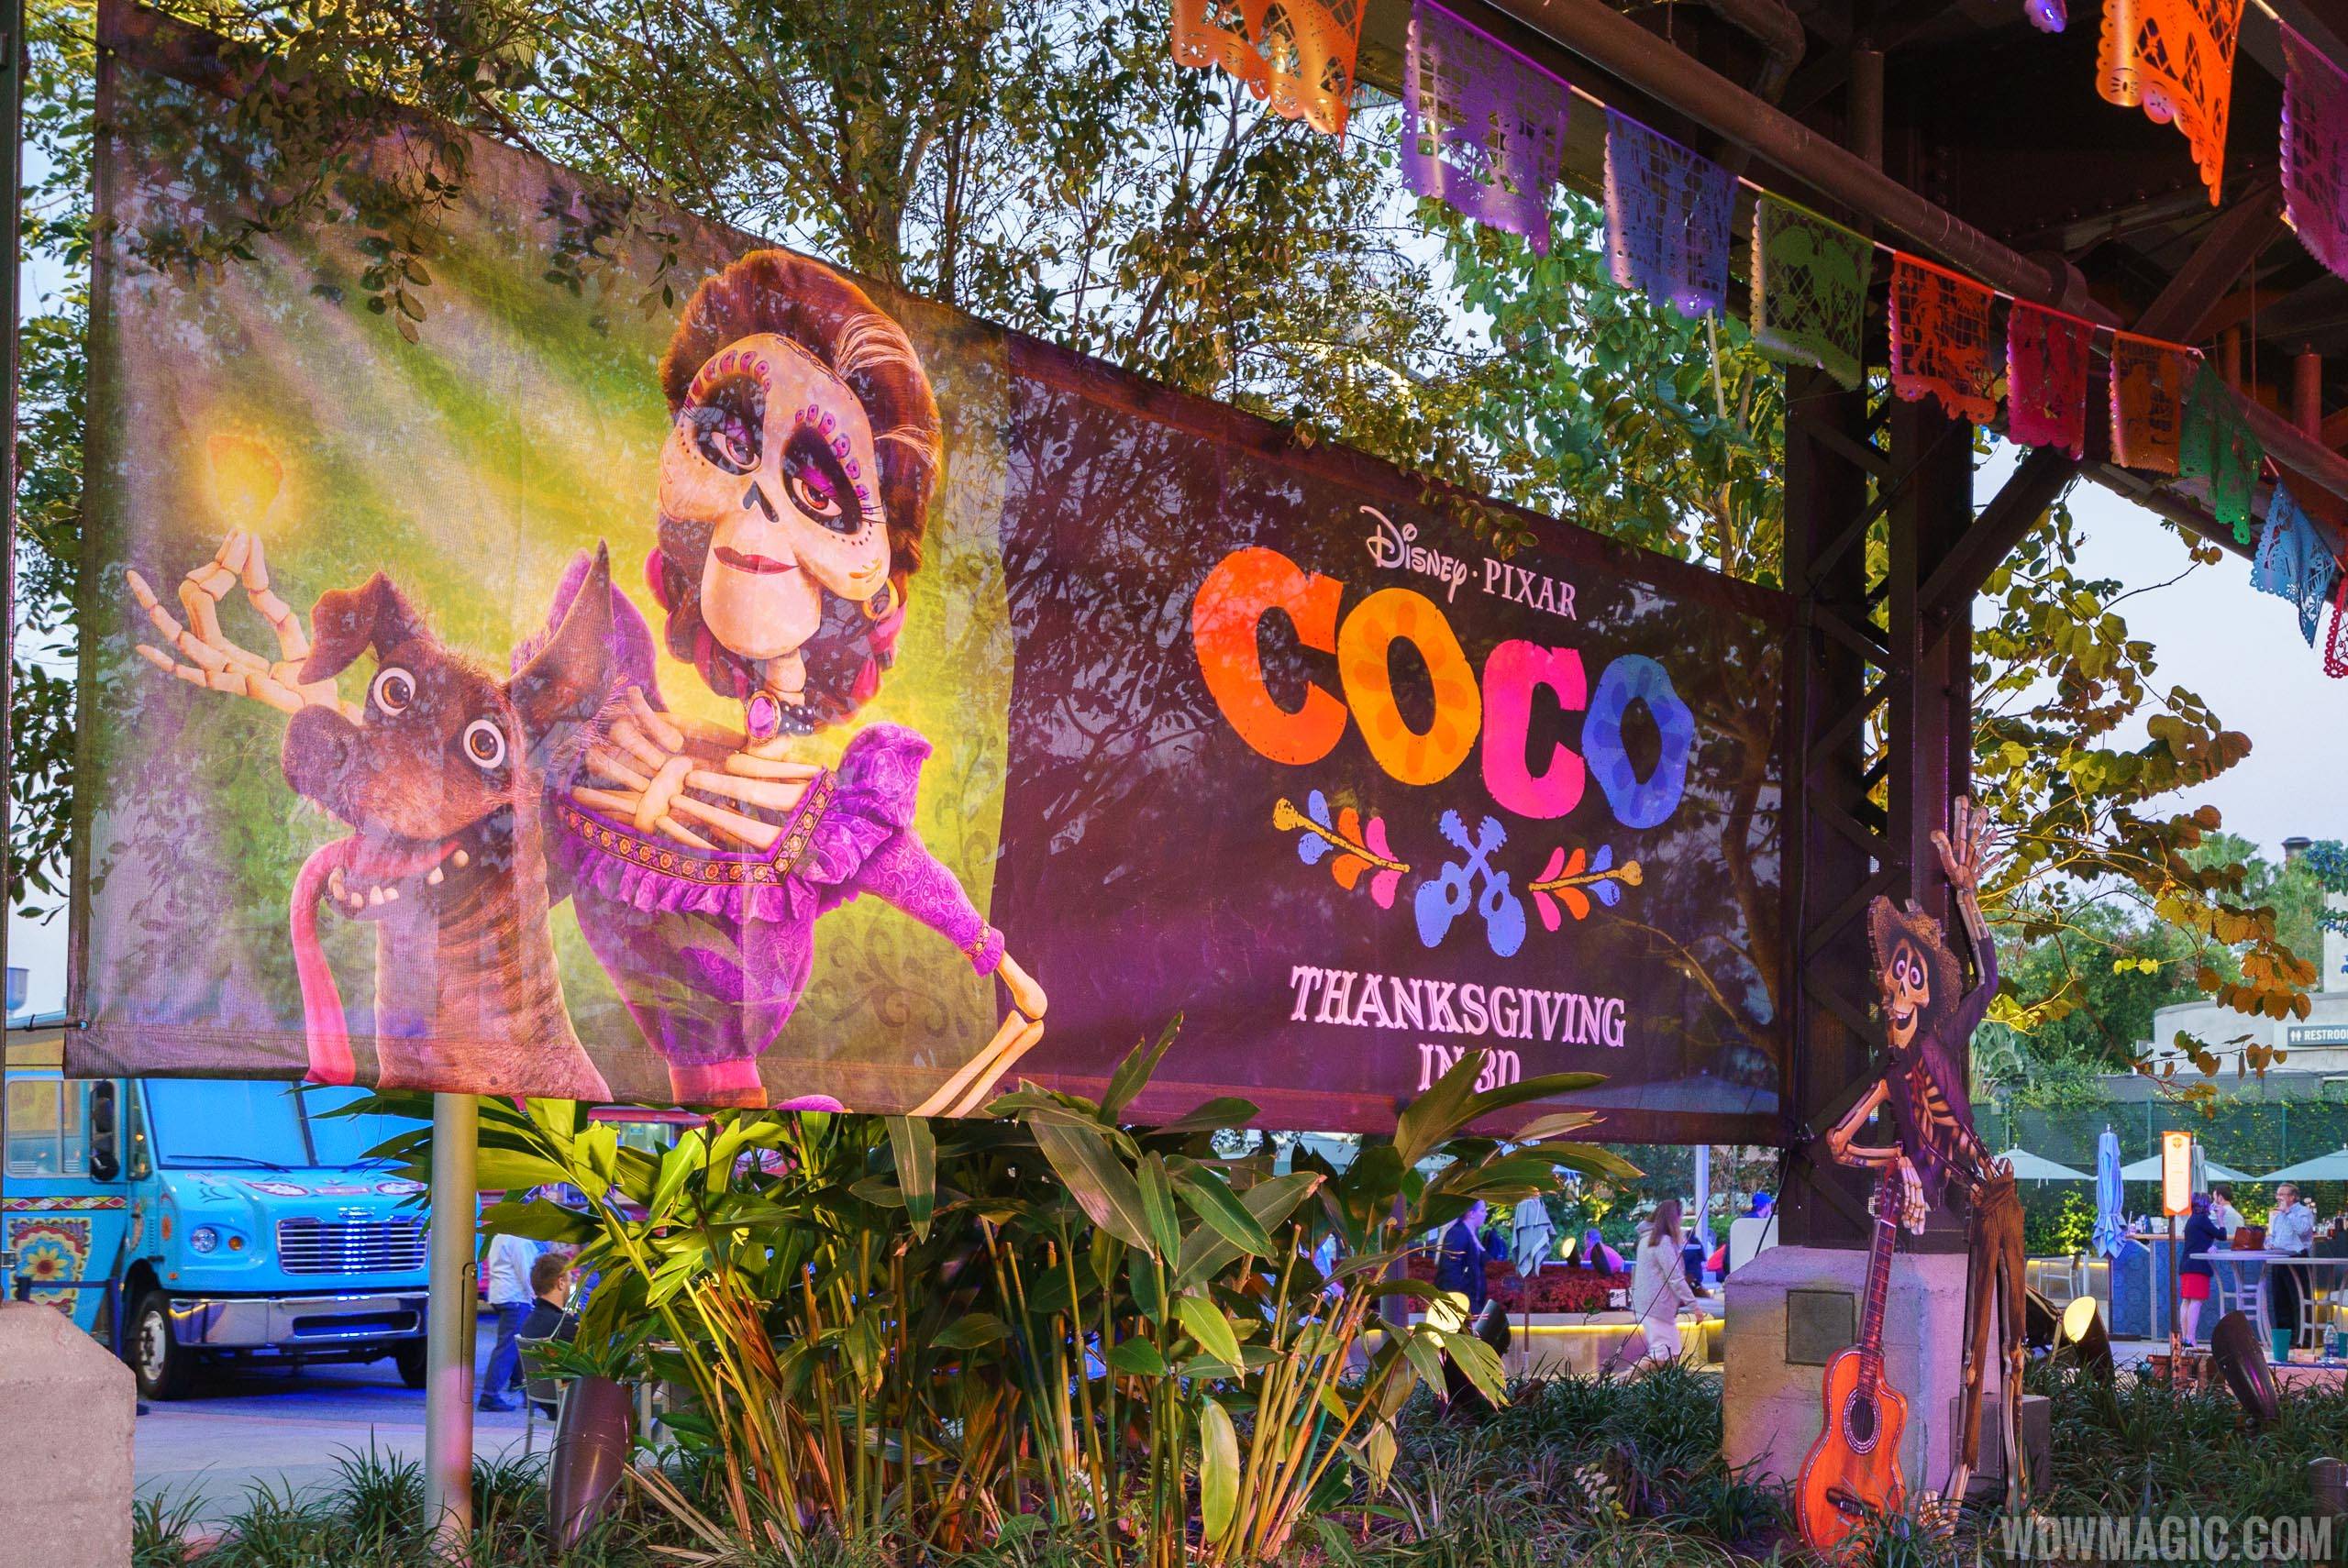 Coco Family Celebration begins this weekend at Disney Springs